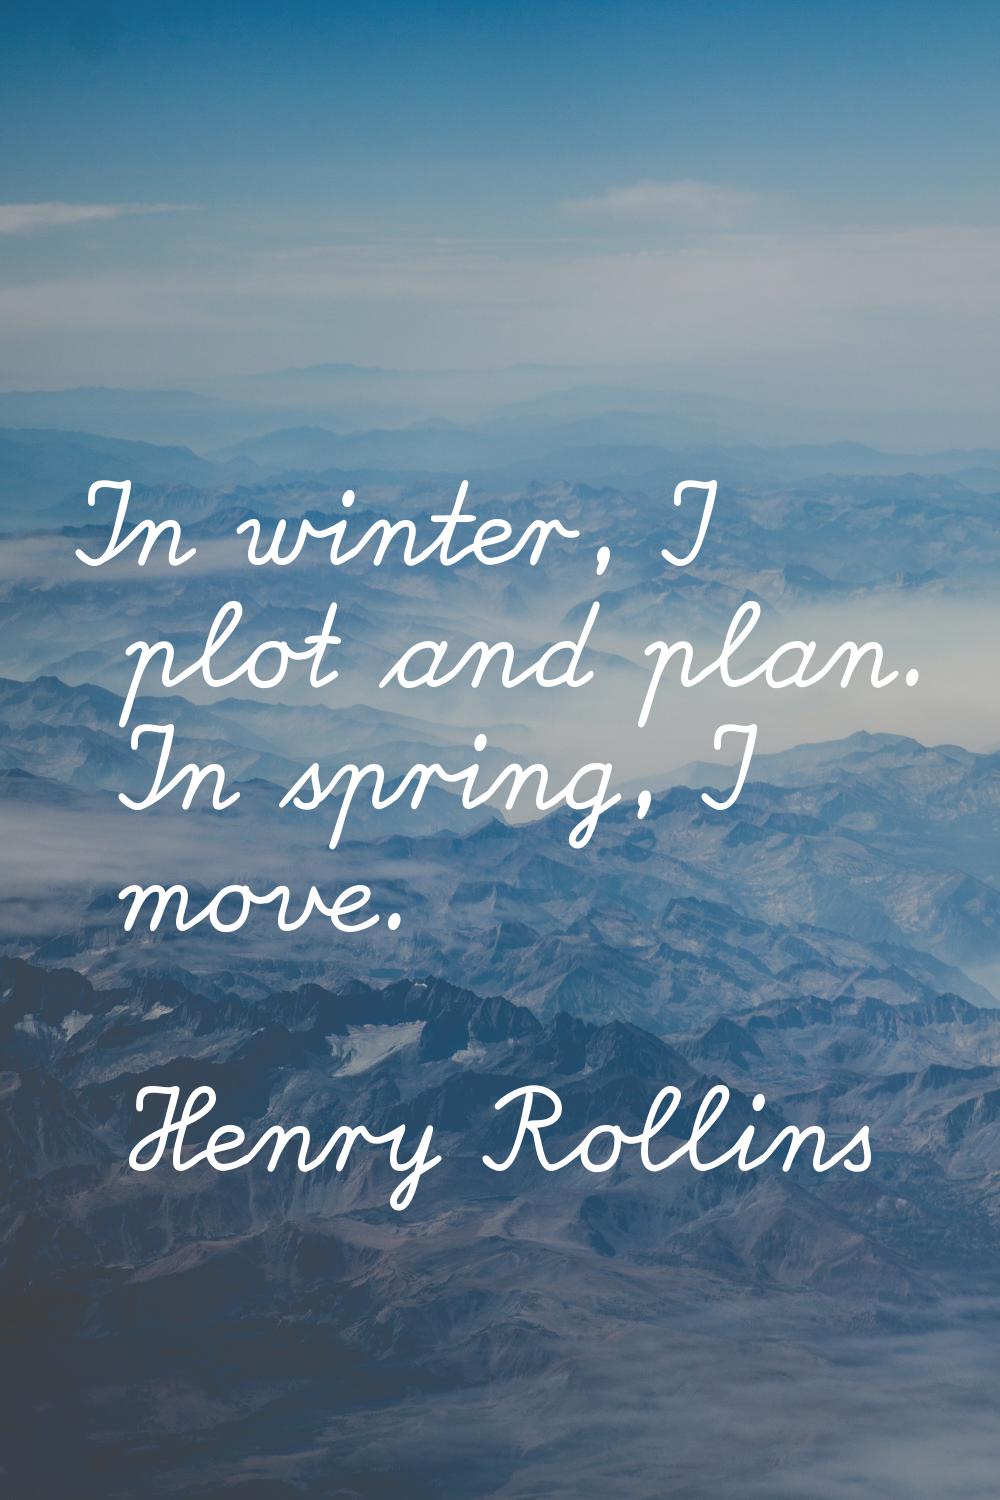 In winter, I plot and plan. In spring, I move.